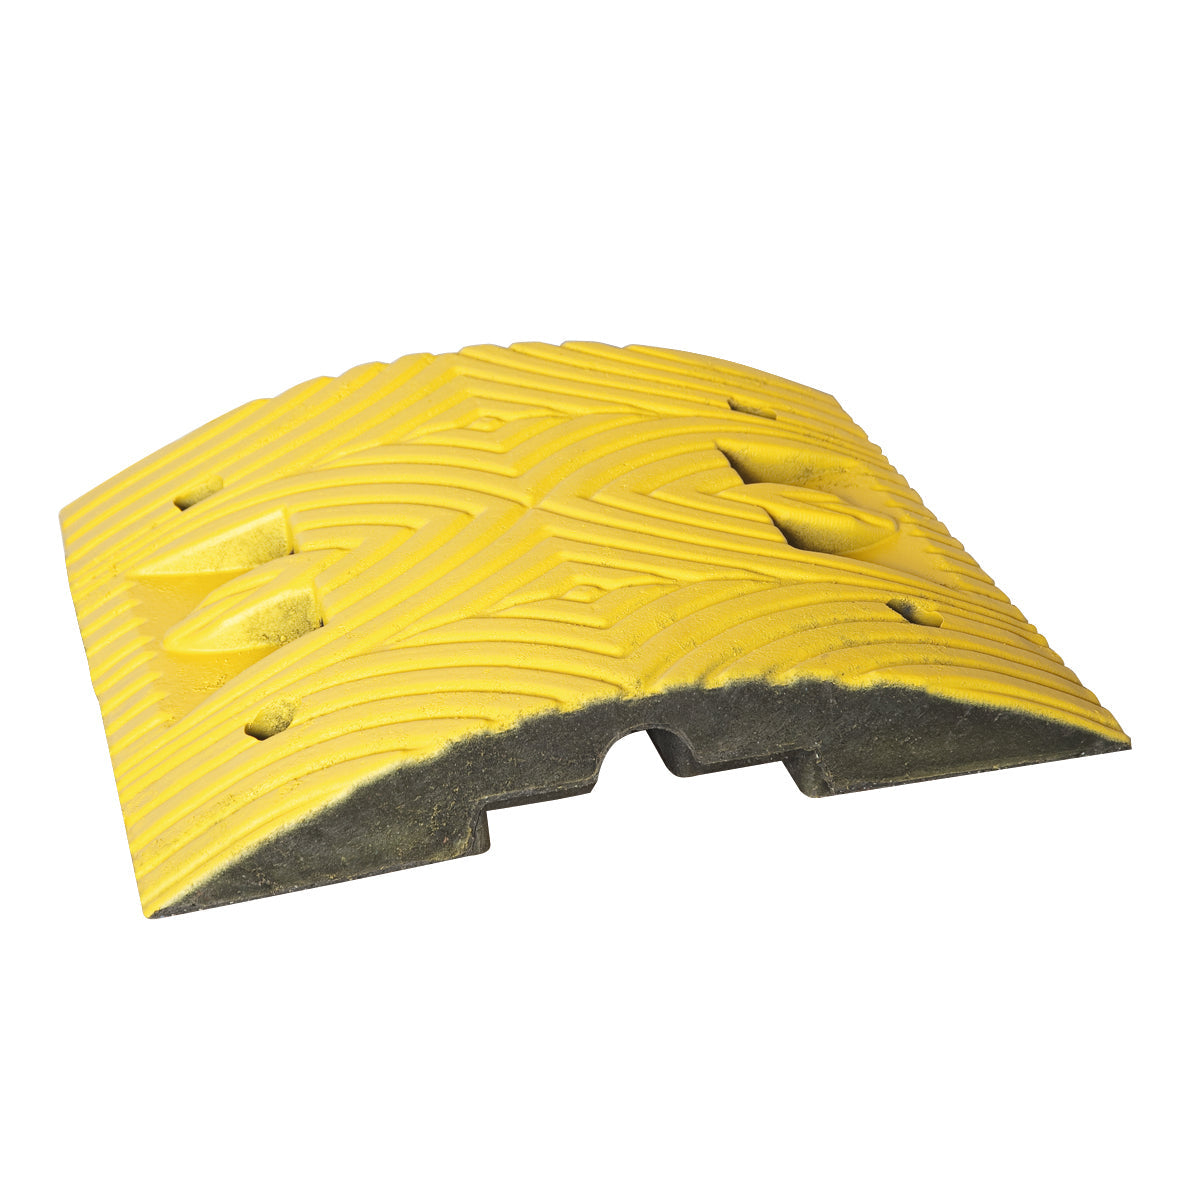 TopStop Eco 70mm yellow mid-section